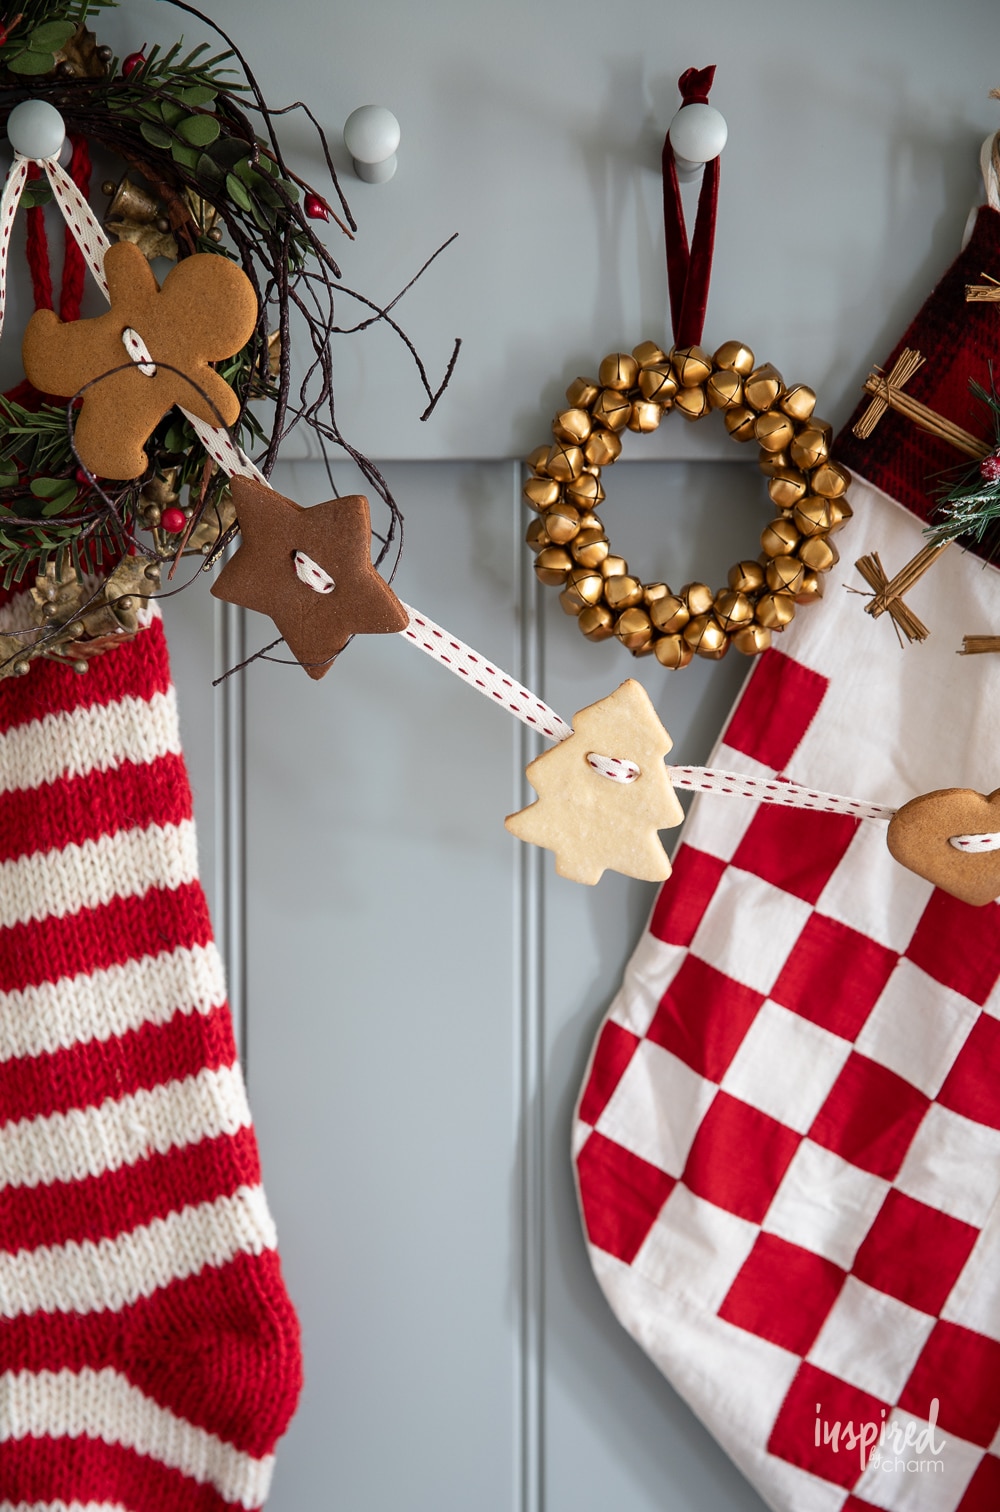 gingerbread cookie garland hung on peg rap with festive christmas decor.